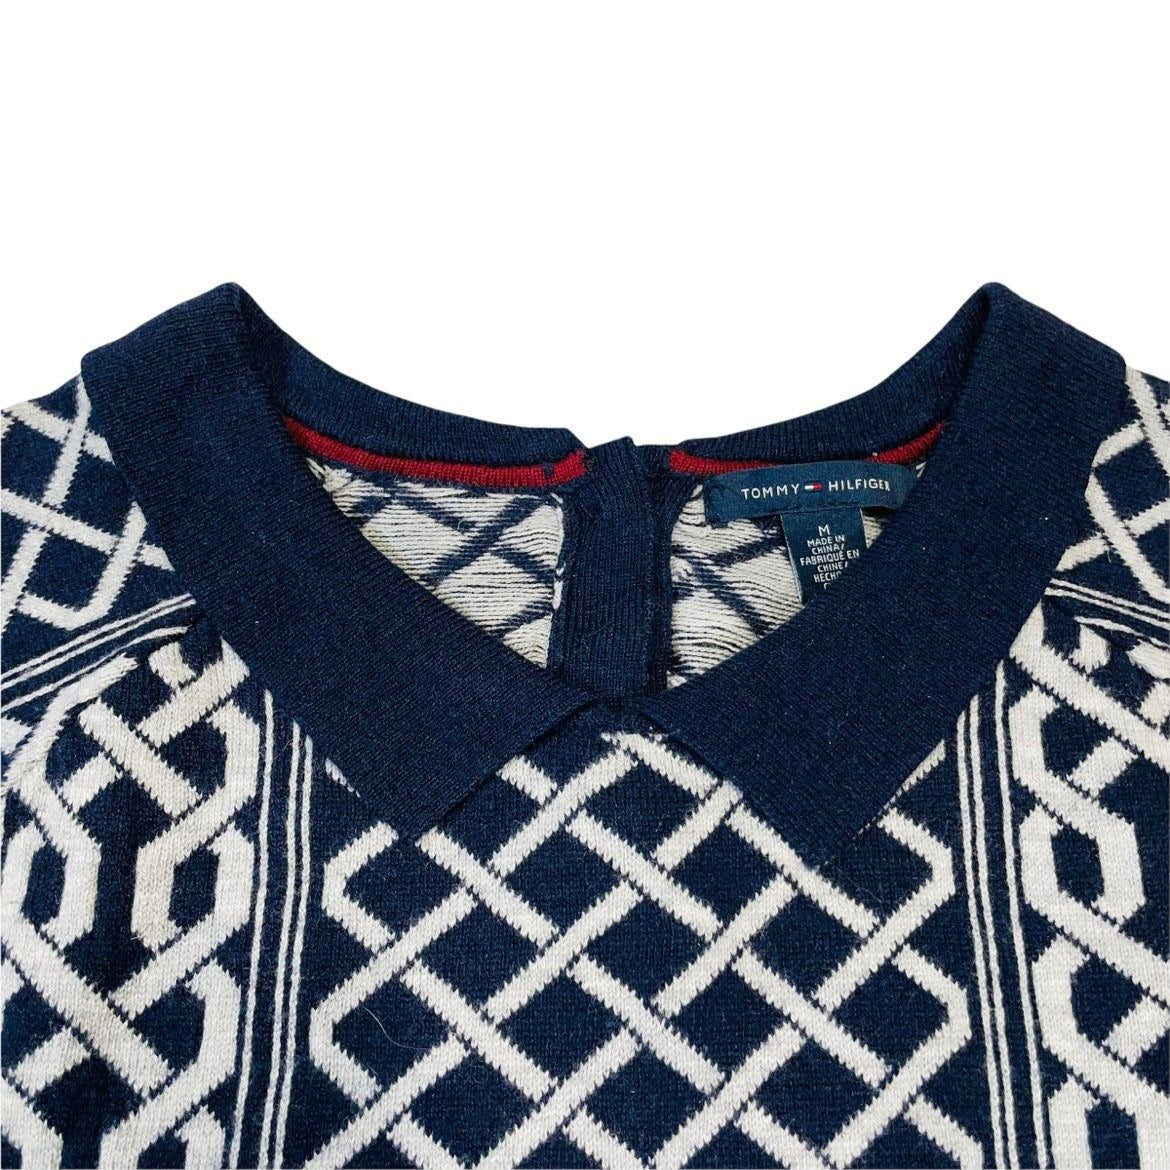 Tommy Hilfiger Navy and White Preppy Short Sleeved Sweater Dress